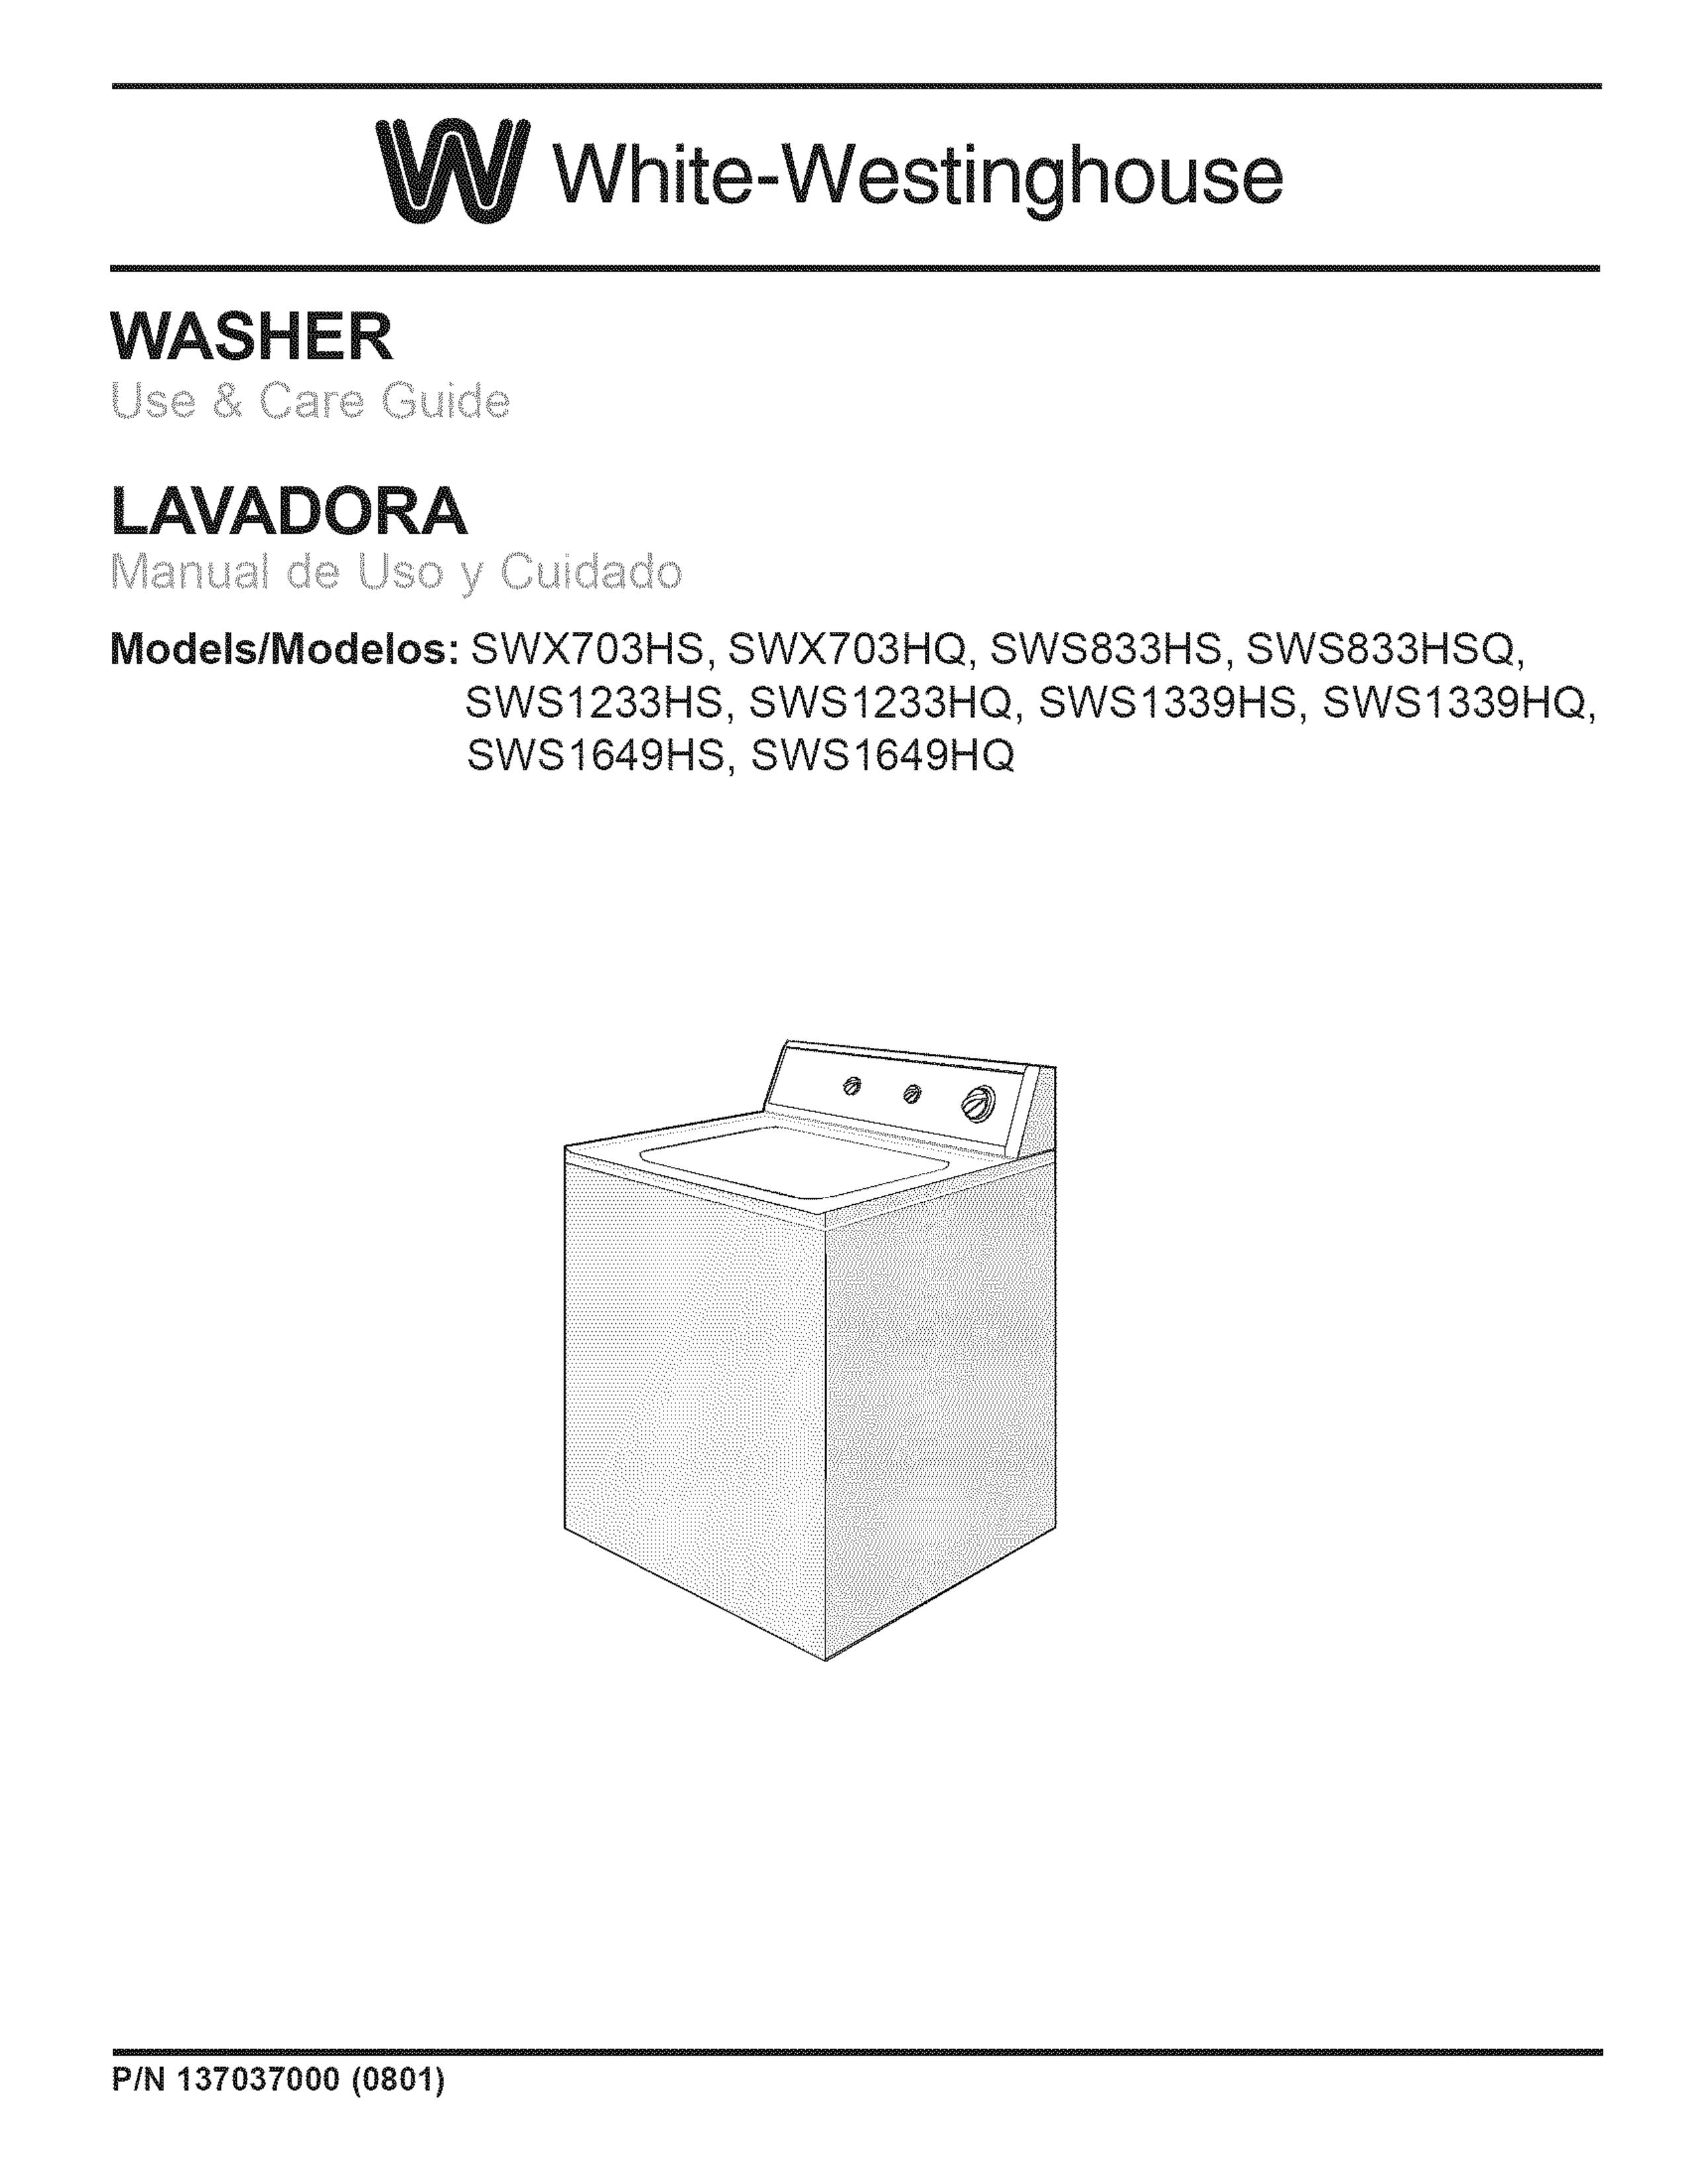 White-Westinghouse SWS1649HS Washer User Manual